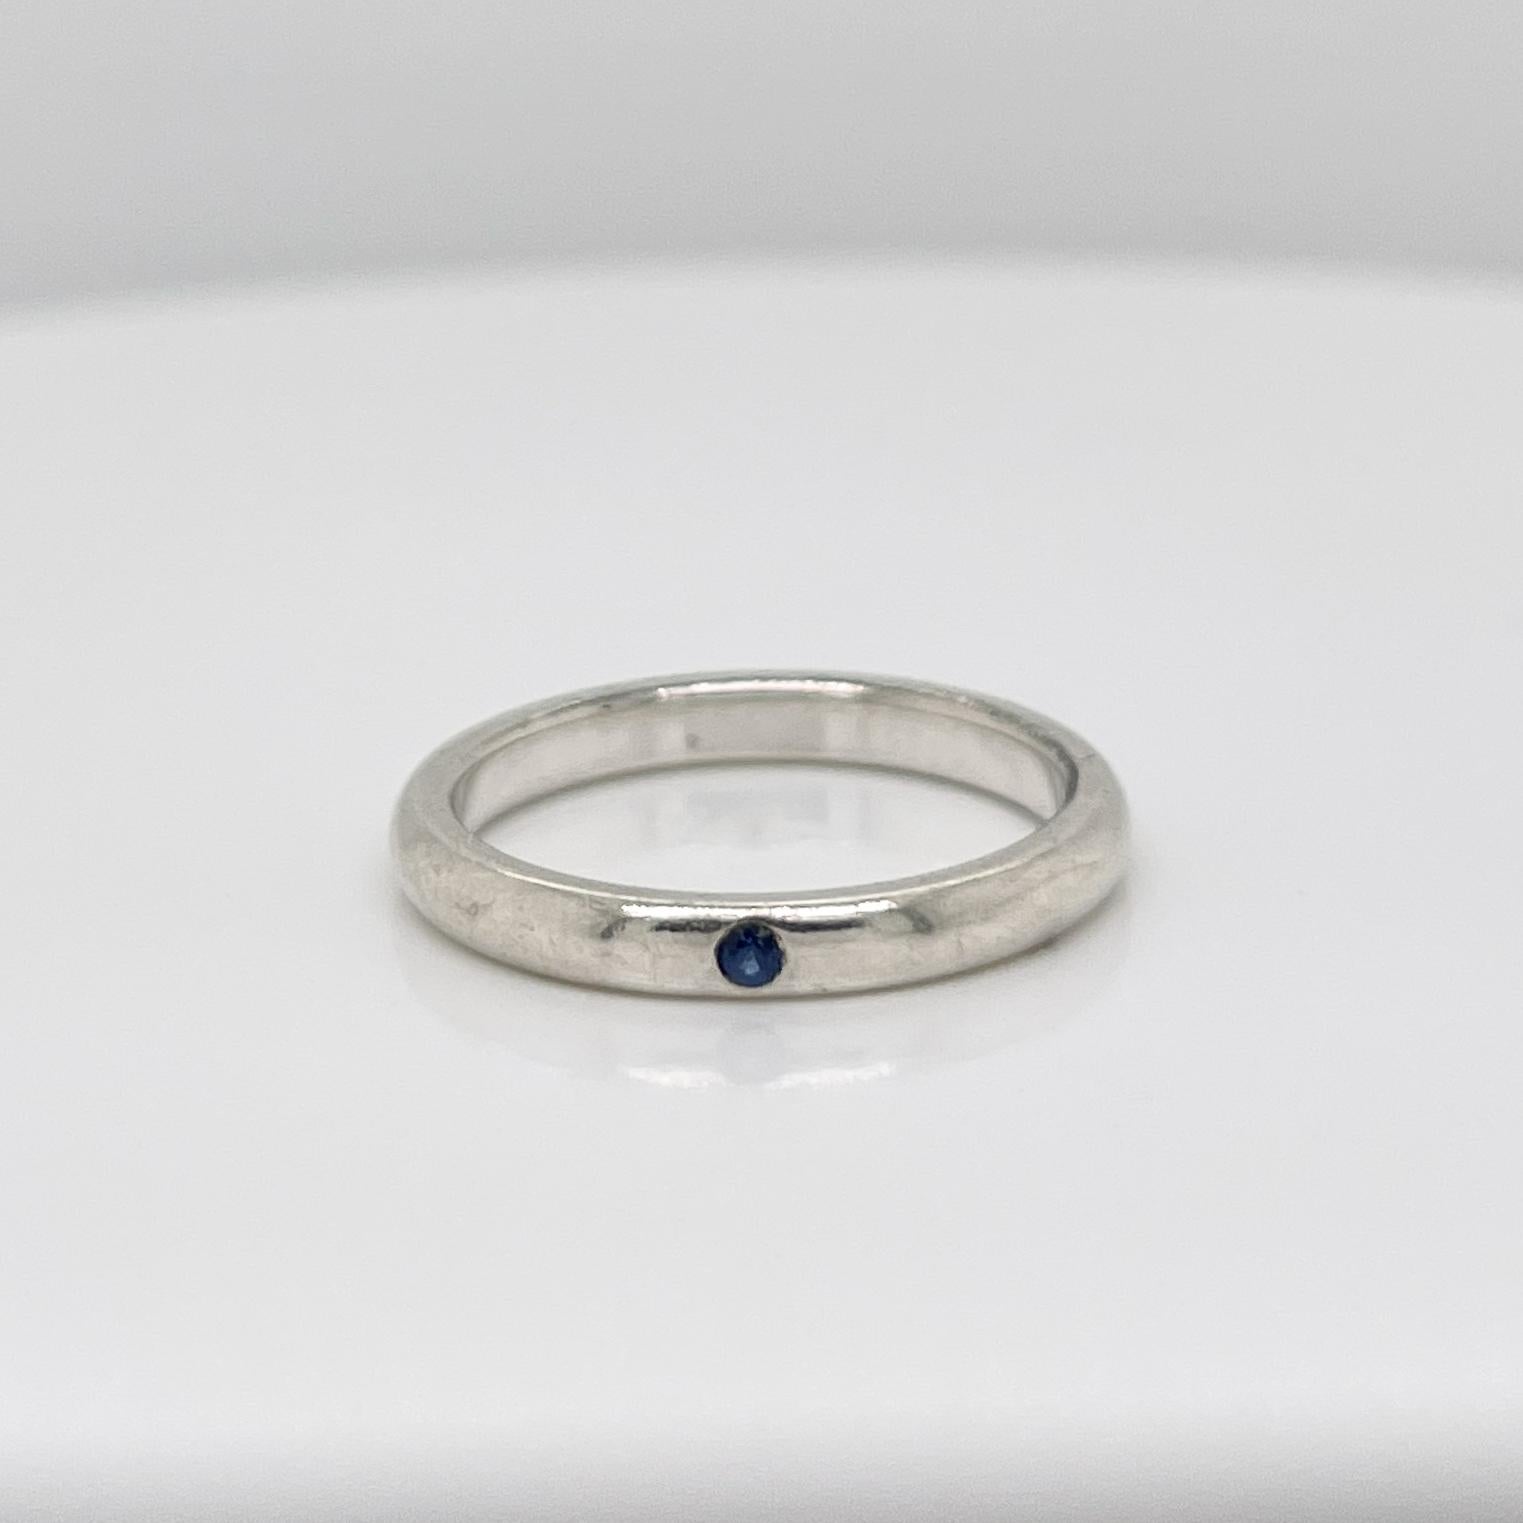 A very fine Tiffany & Co. sterling silver ring.	

By Elsa Peretti. 

Flush set with a round cut sapphire.

Perfect, Simple, Refined.

Date:
20th Century

Overall Condition:
It is in overall good, as-pictured, used estate condition with some very